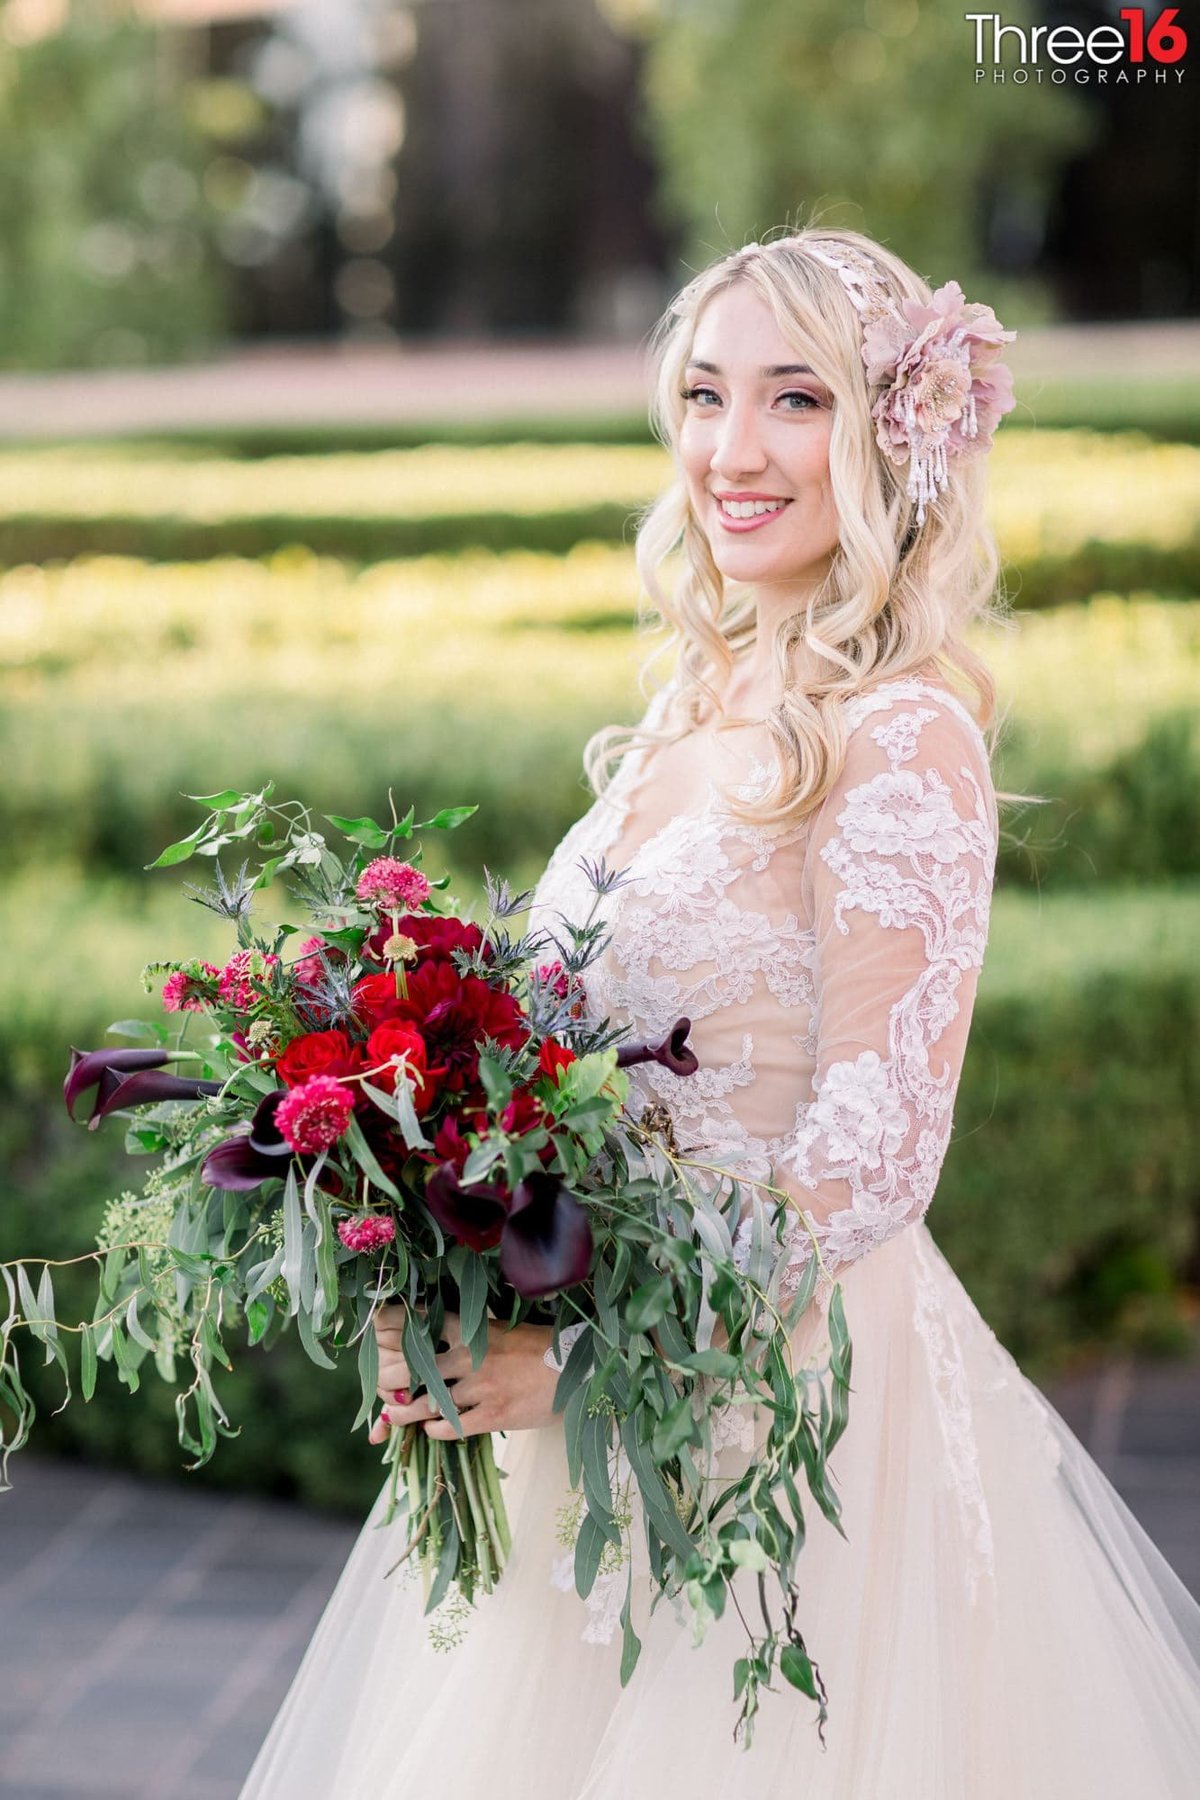 Bride smiles as she poses for the wedding photographer